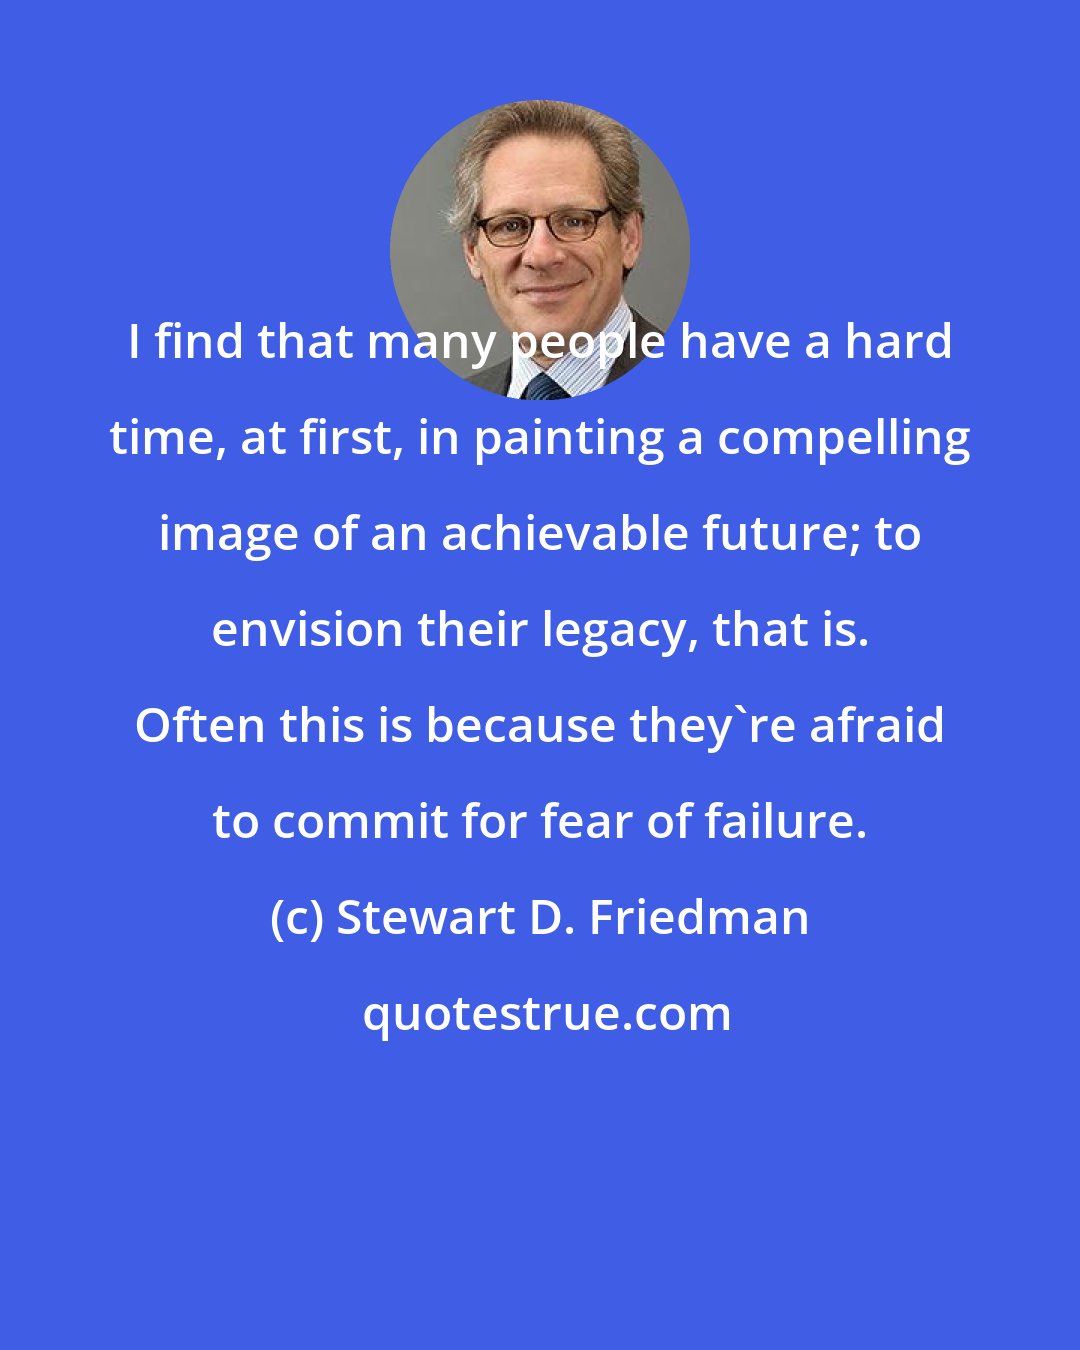 Stewart D. Friedman: I find that many people have a hard time, at first, in painting a compelling image of an achievable future; to envision their legacy, that is. Often this is because they're afraid to commit for fear of failure.